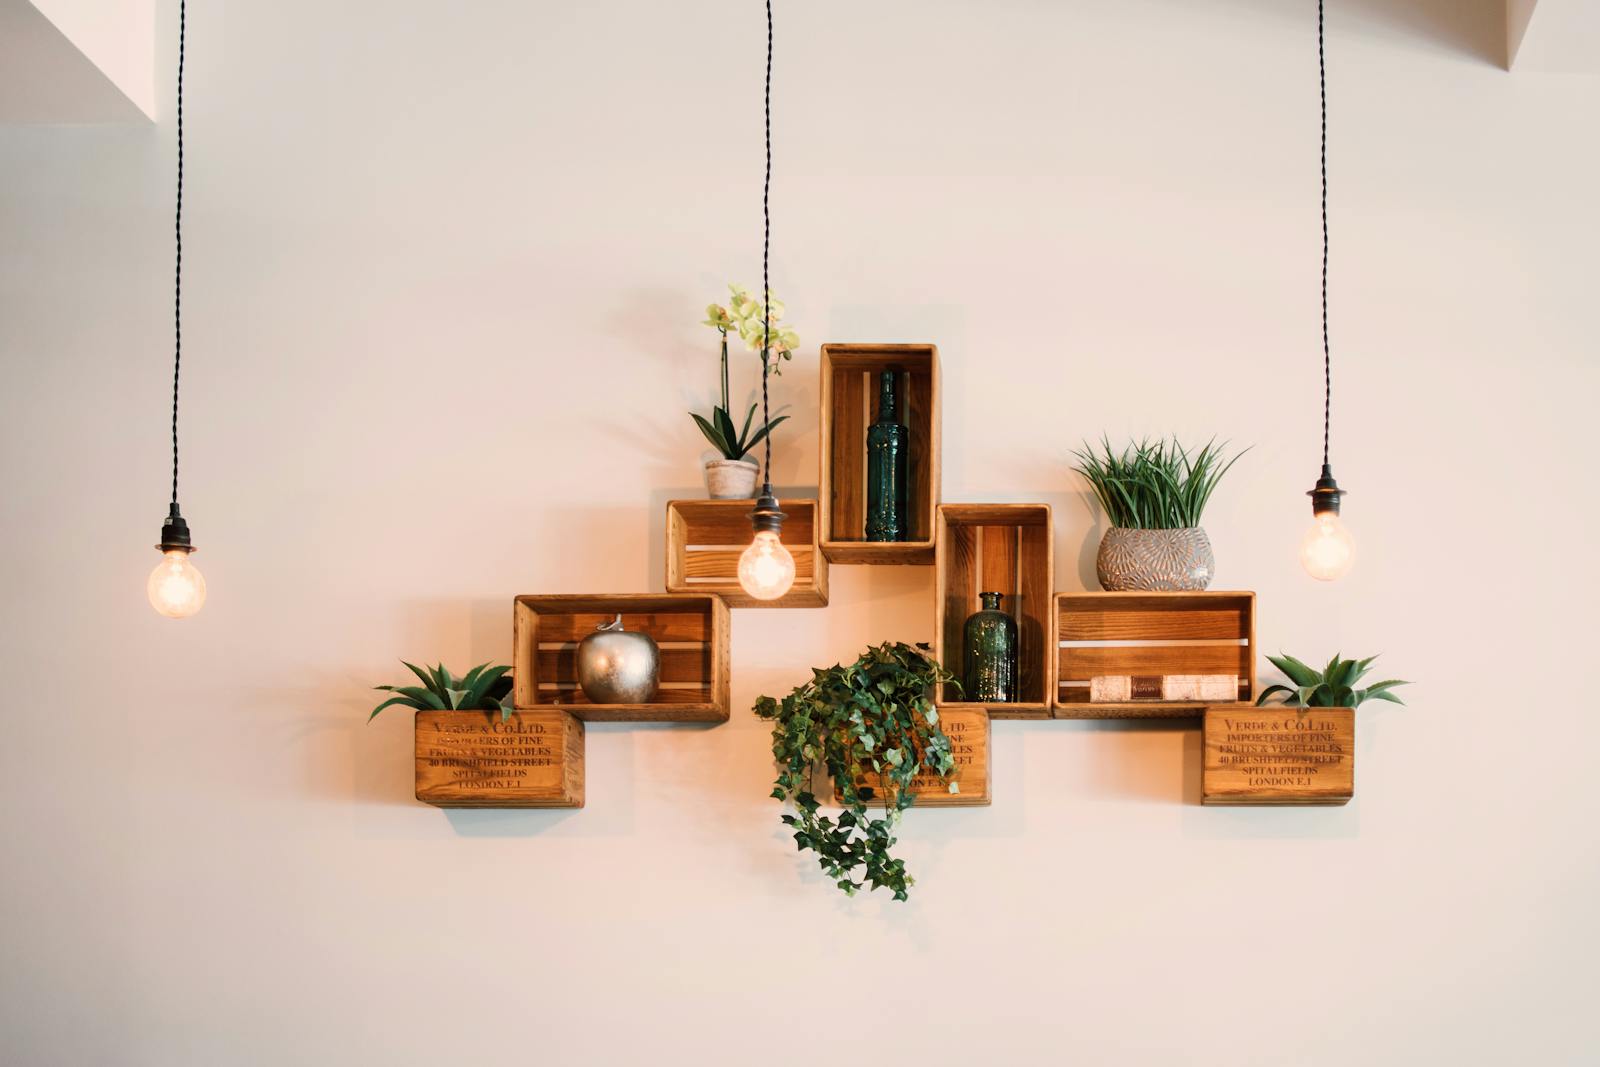 Crates Mounted on Wall in Decorative Fashion